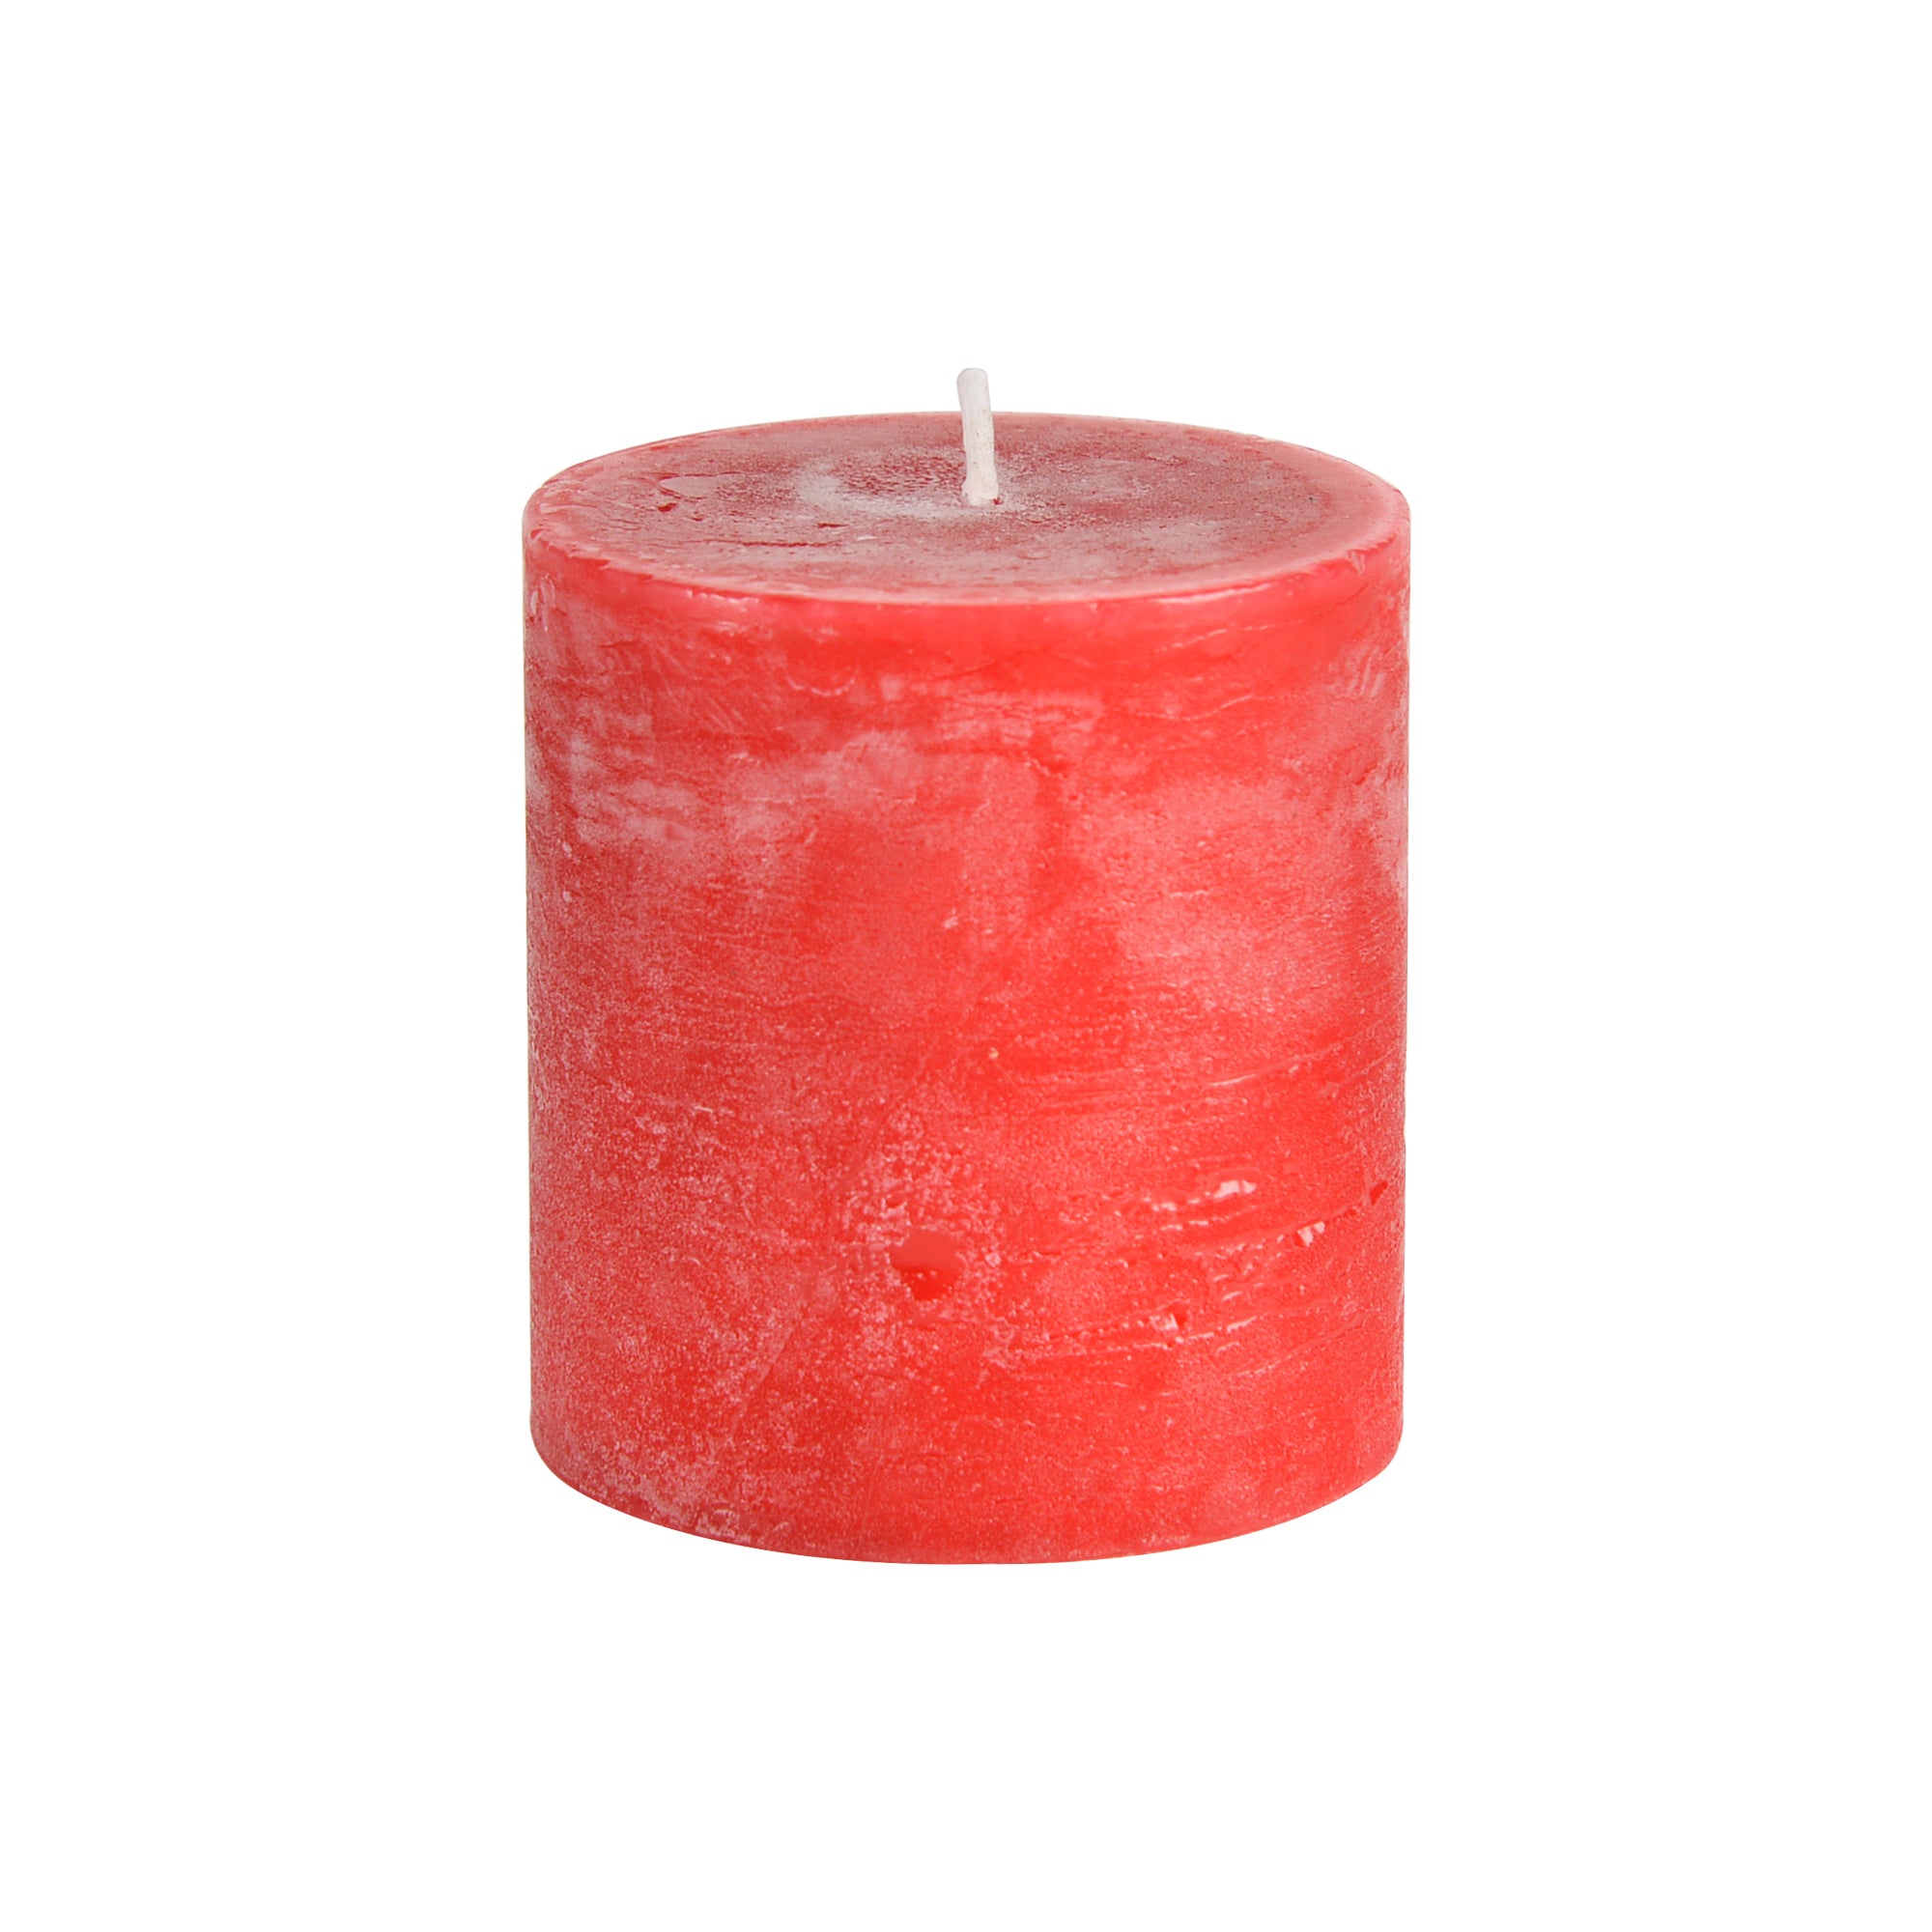 Emergency Essentials 100 hour candle